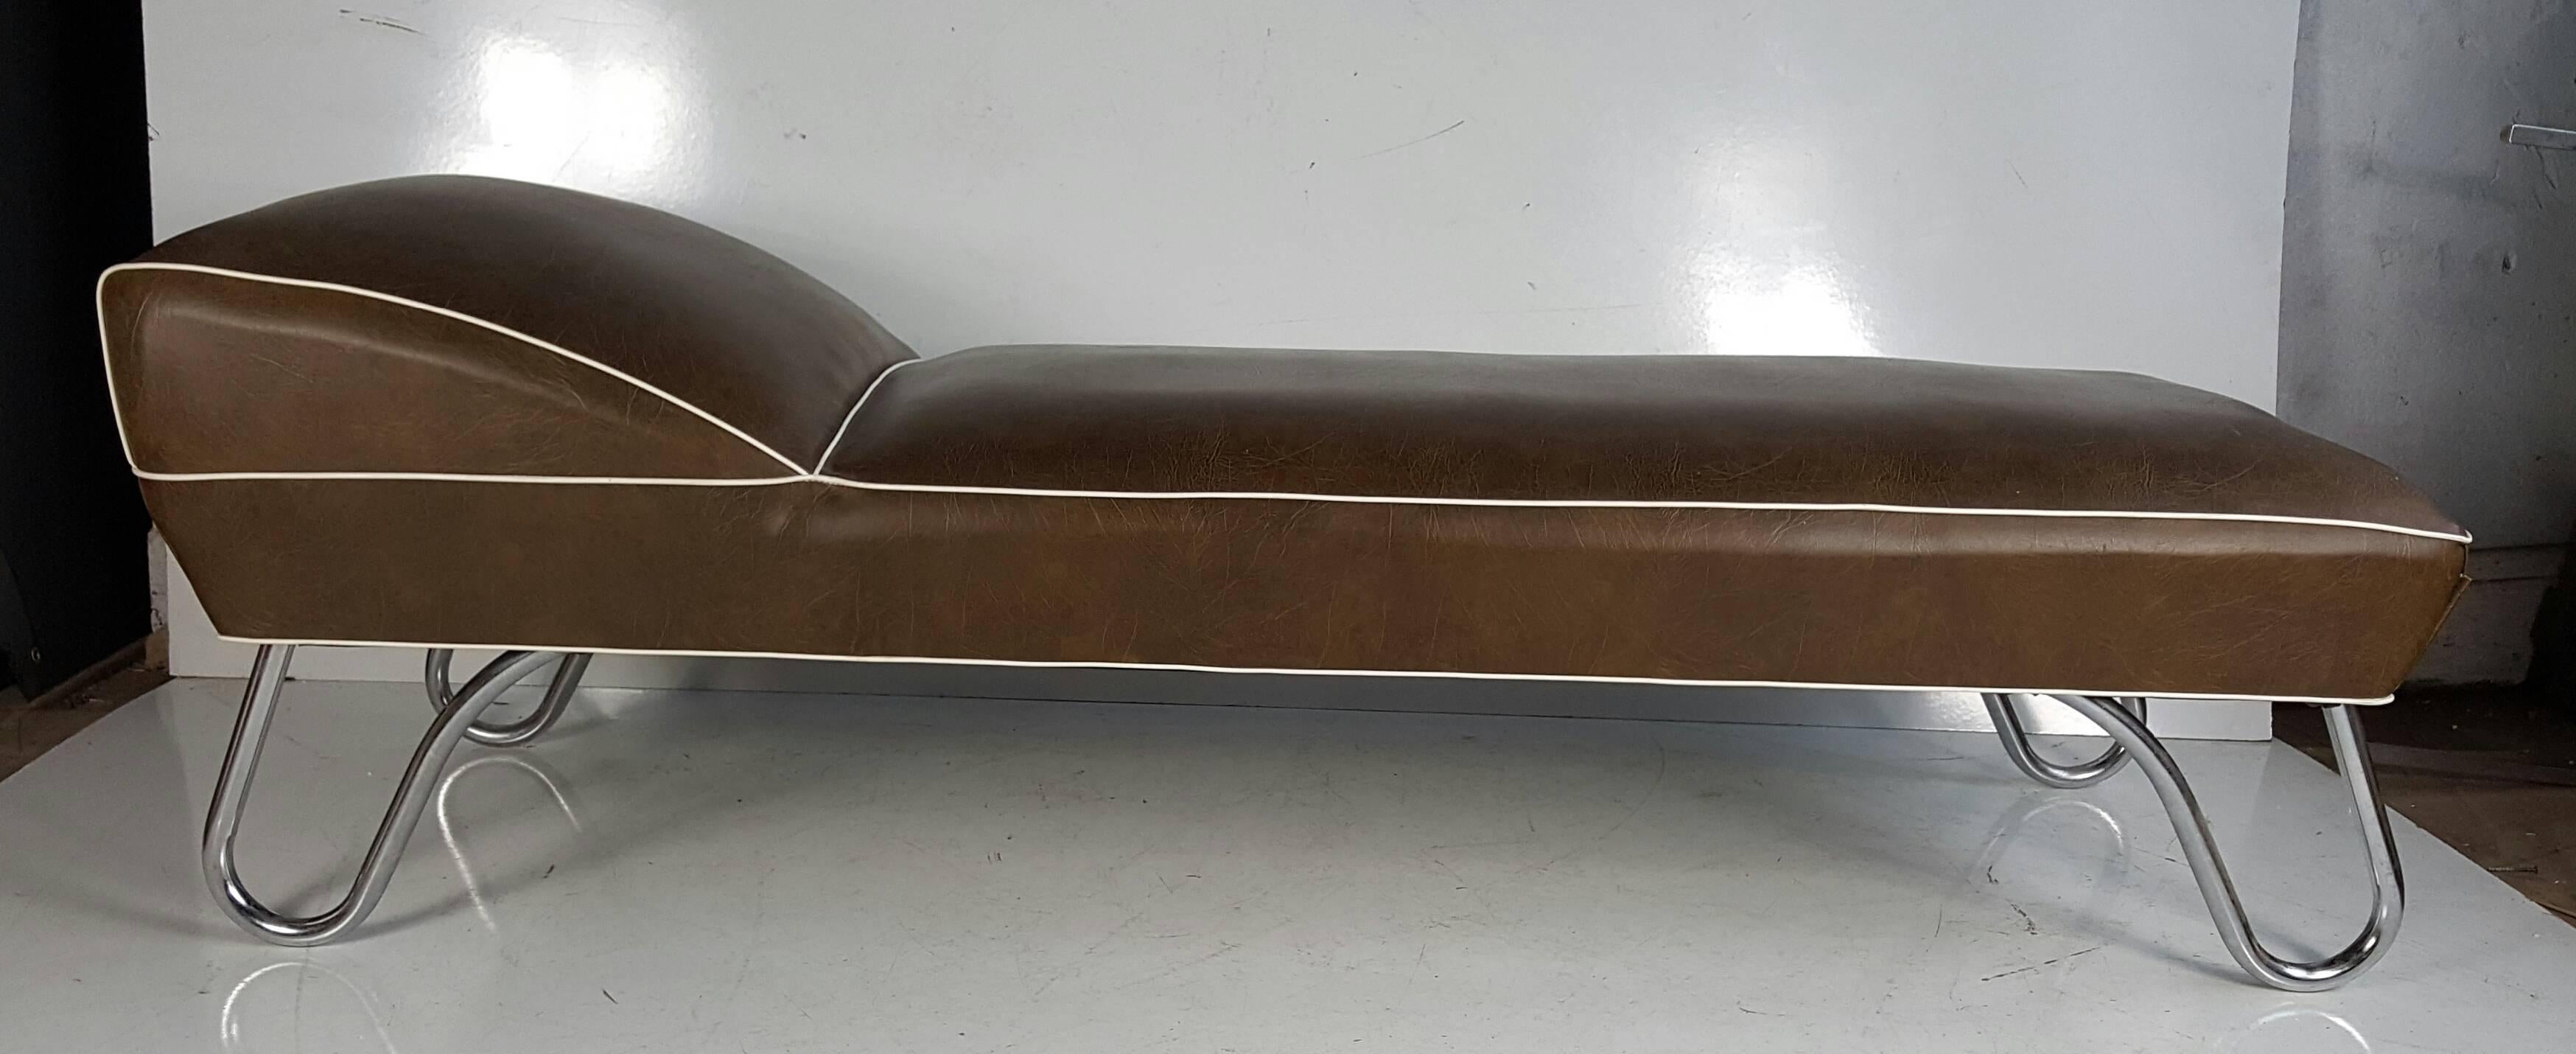 Daybed upholstered in brown vinyl with white trim. with tubular chrome legs.Classic Art Deco design,,